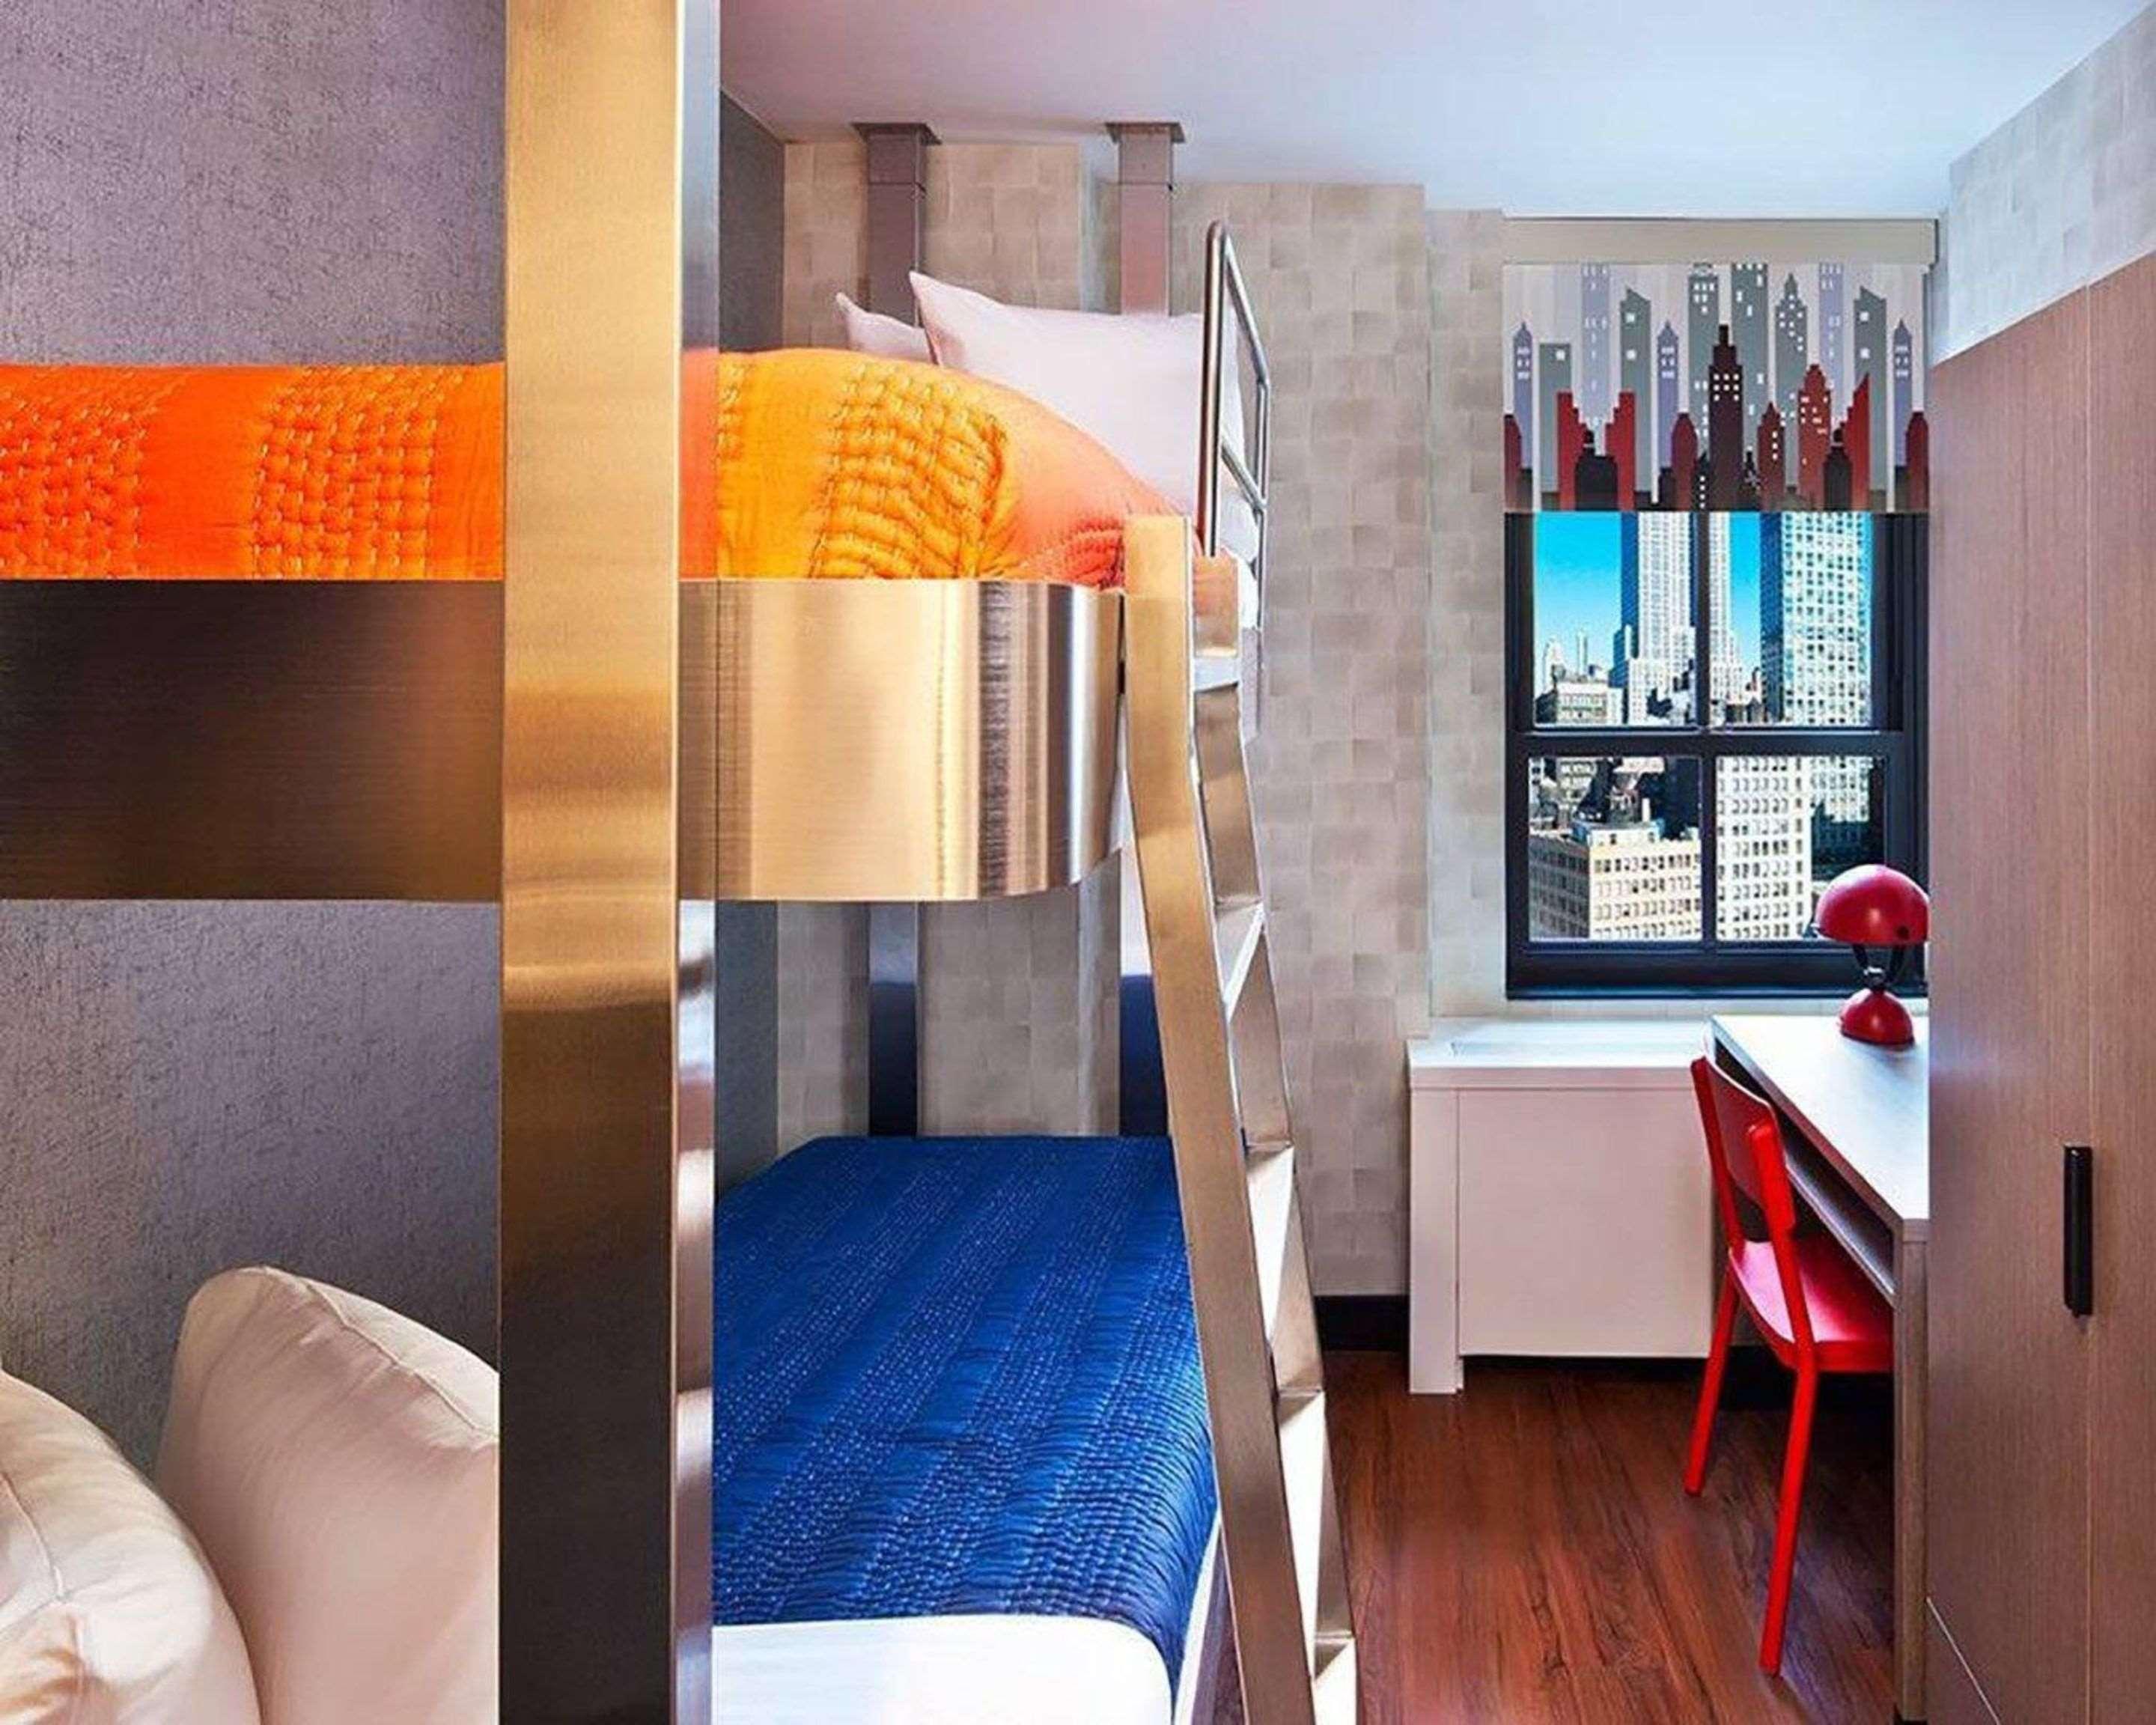 The Paul Hotel Nyc-Chelsea, Ascend Hotel Collection Ню Йорк Екстериор снимка